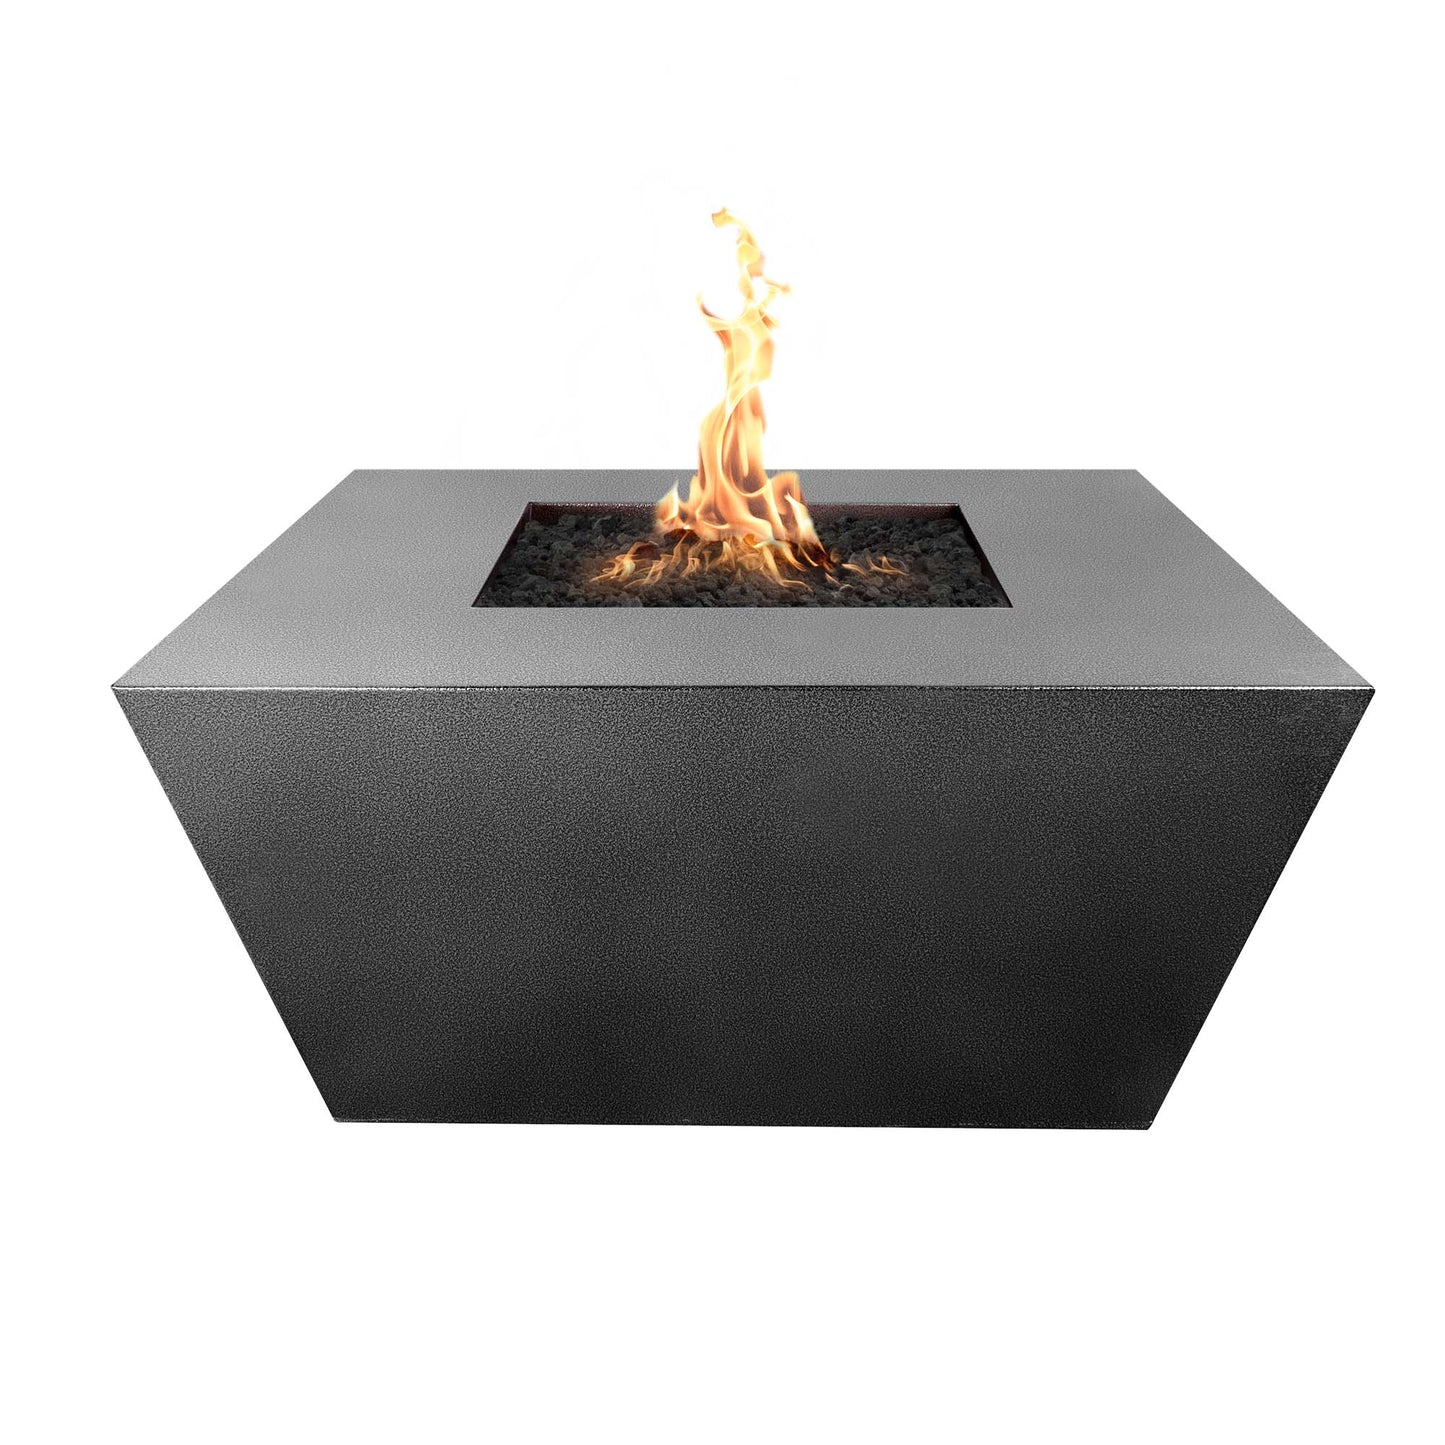 The Outdoor Plus Square Redan 48" Java Powder Coated Metal Natural Gas Fire Pit with 110V Electronic Ignition